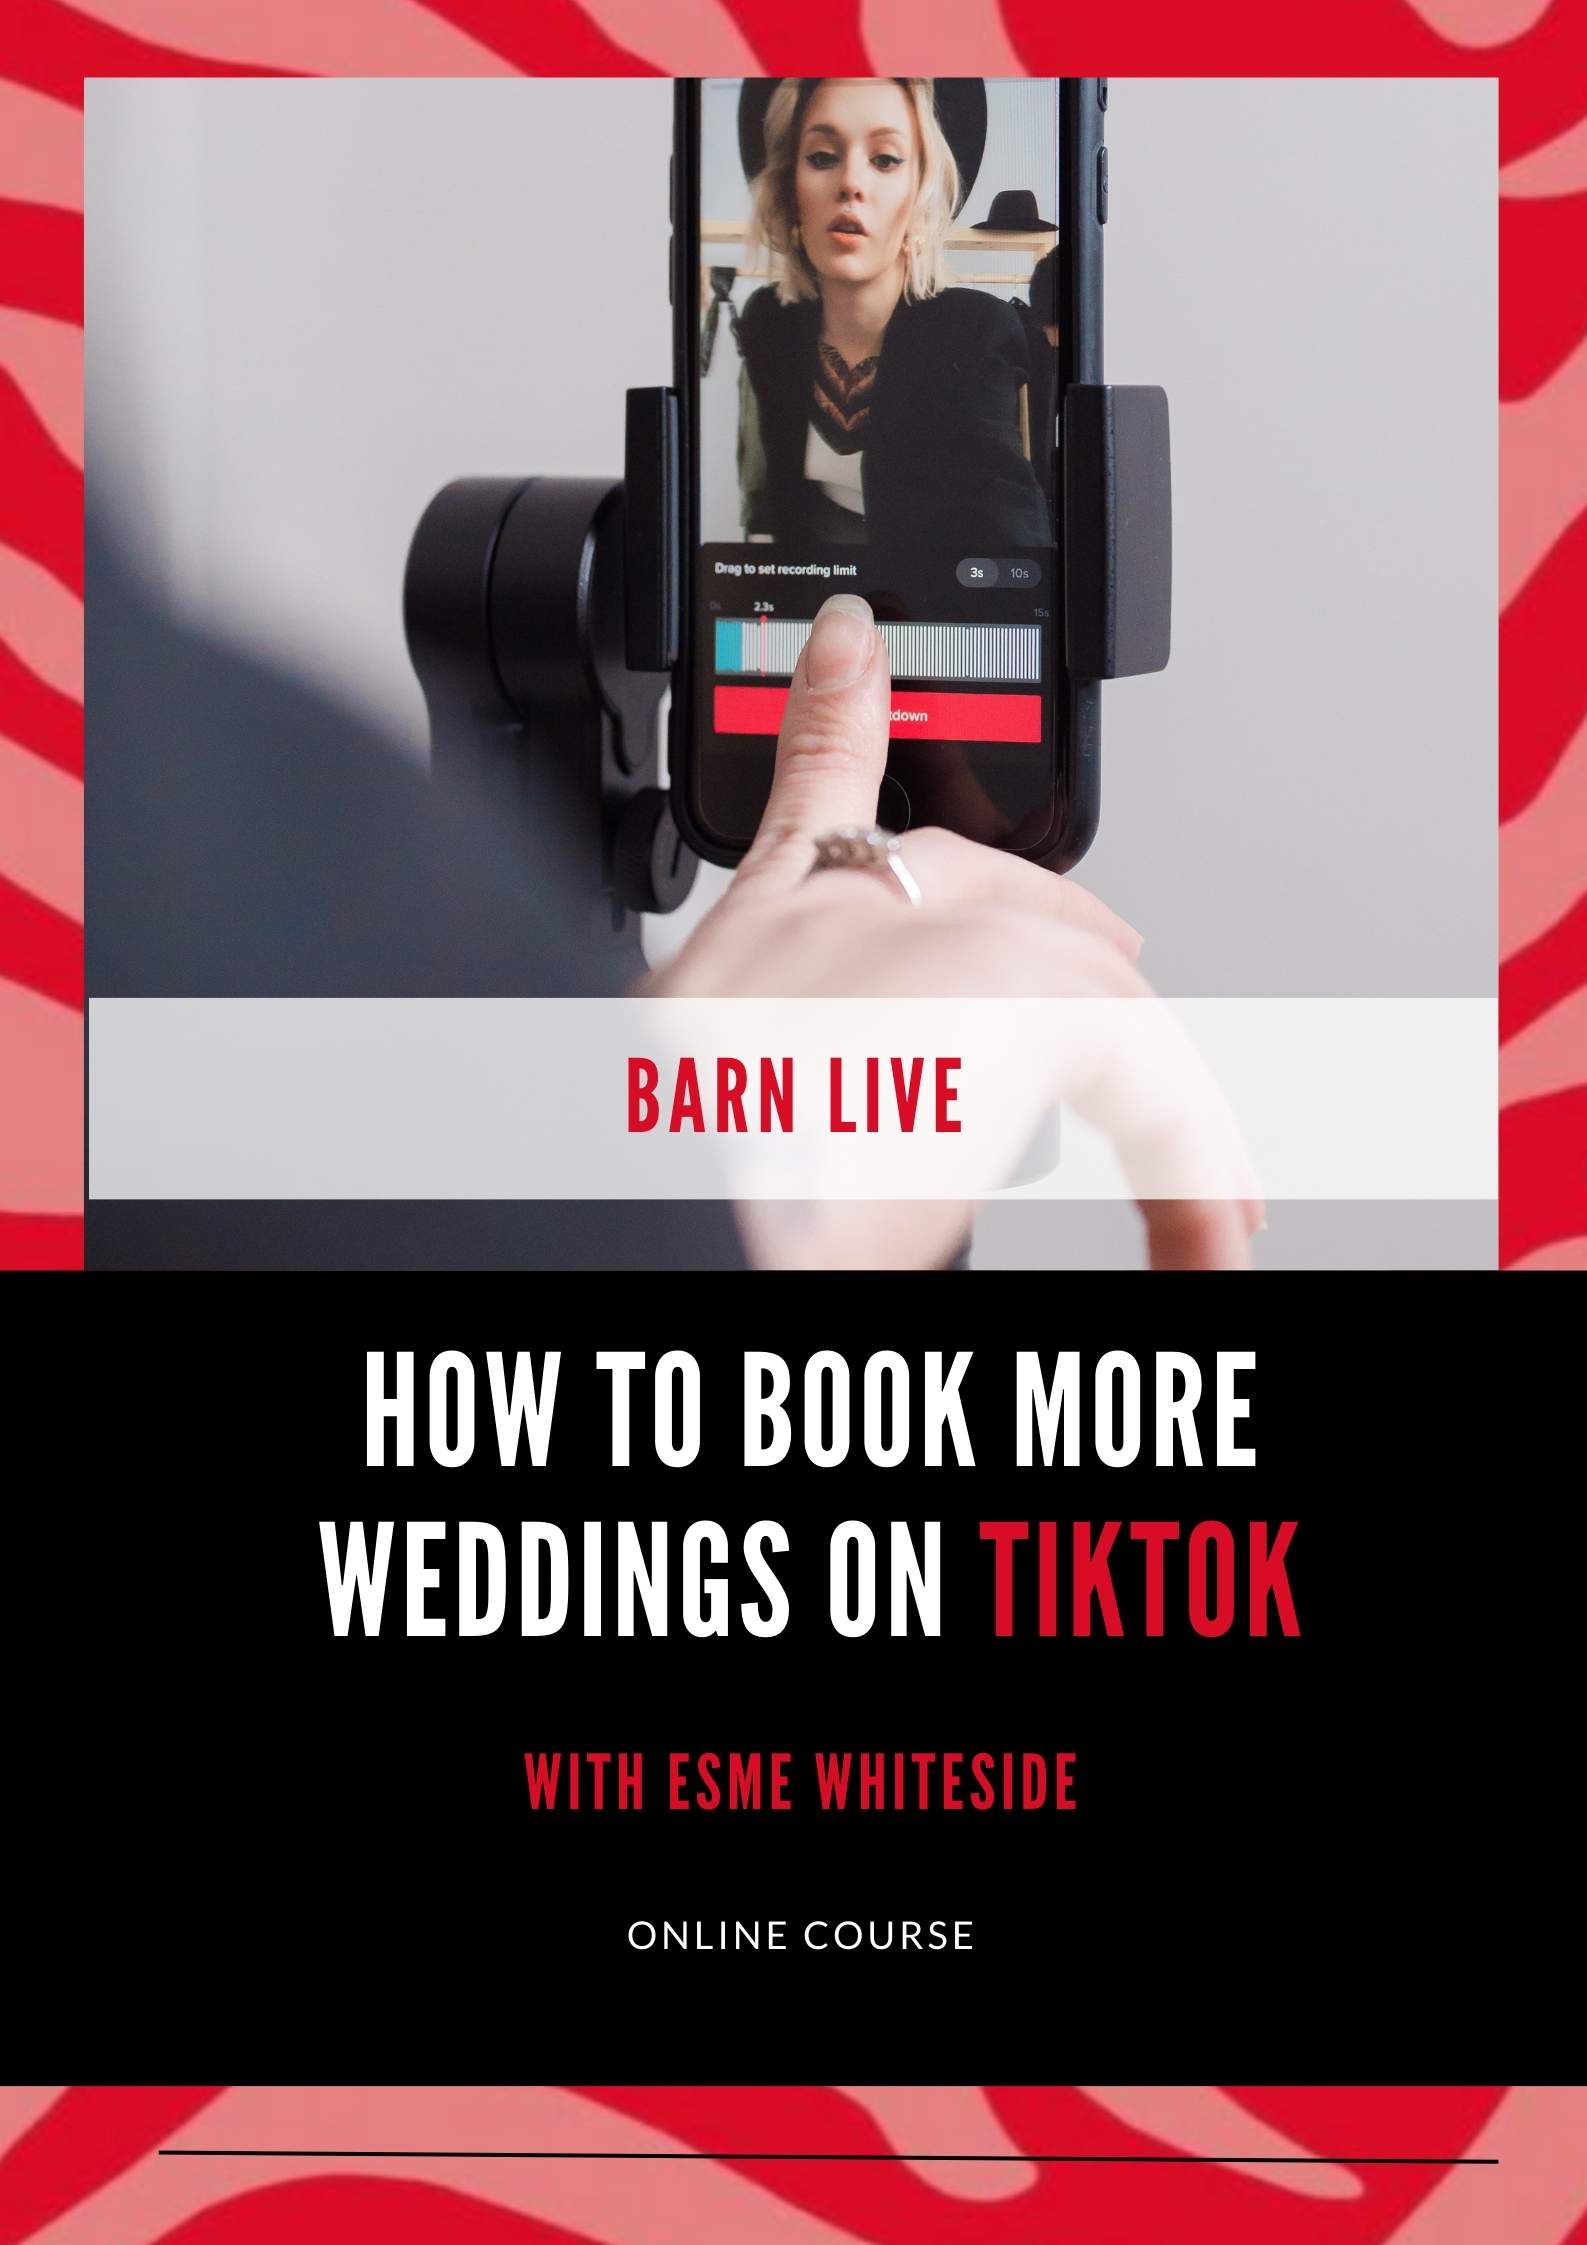 How to book more weddings on tiktok course